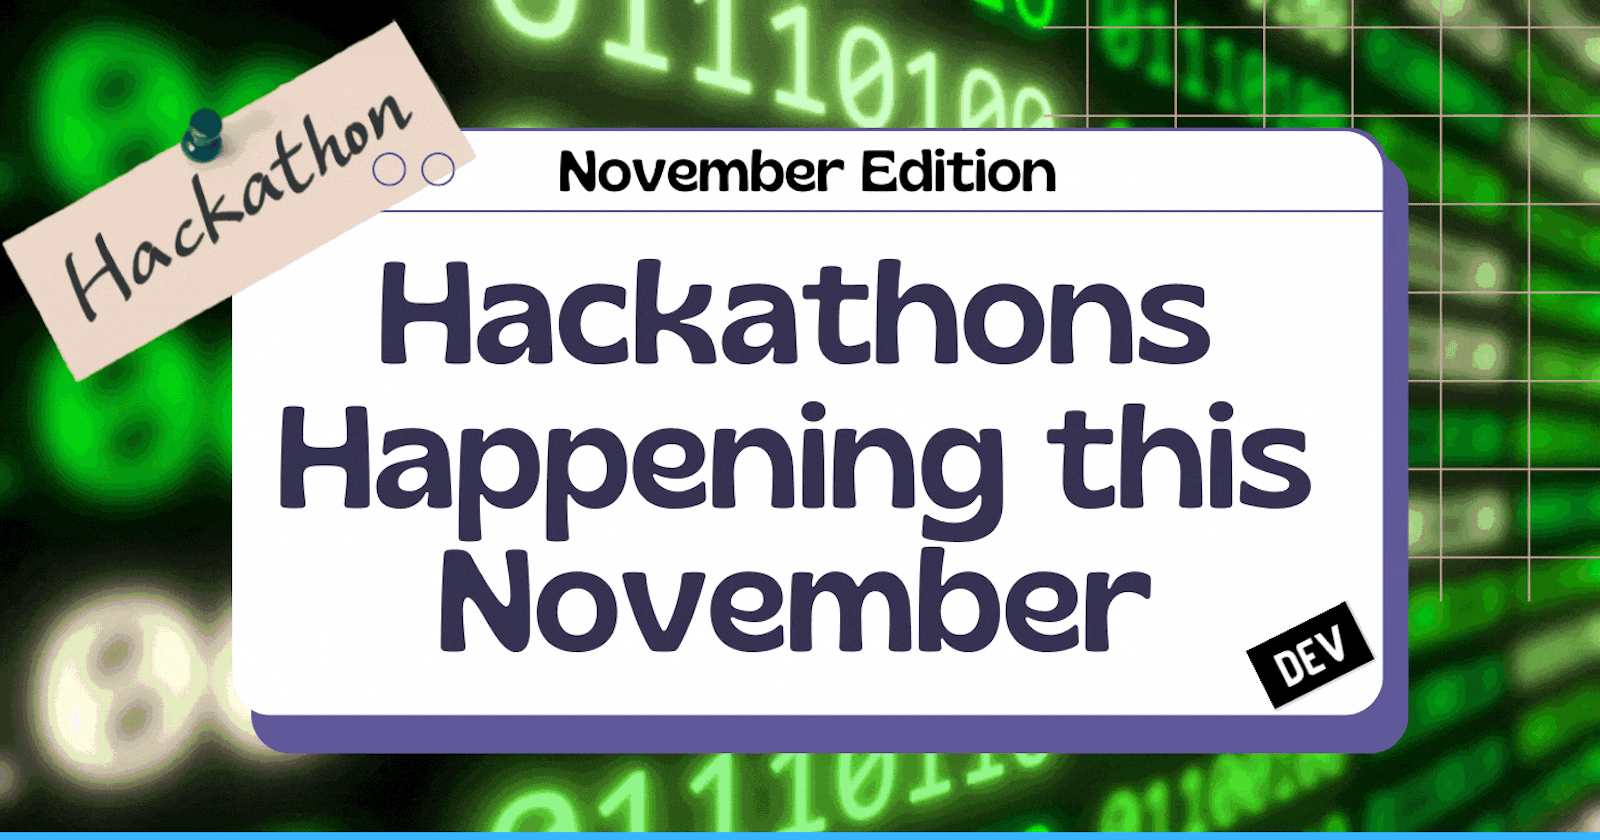 Ongoing & Upcoming Hackathons and Coding Challenges - November edition